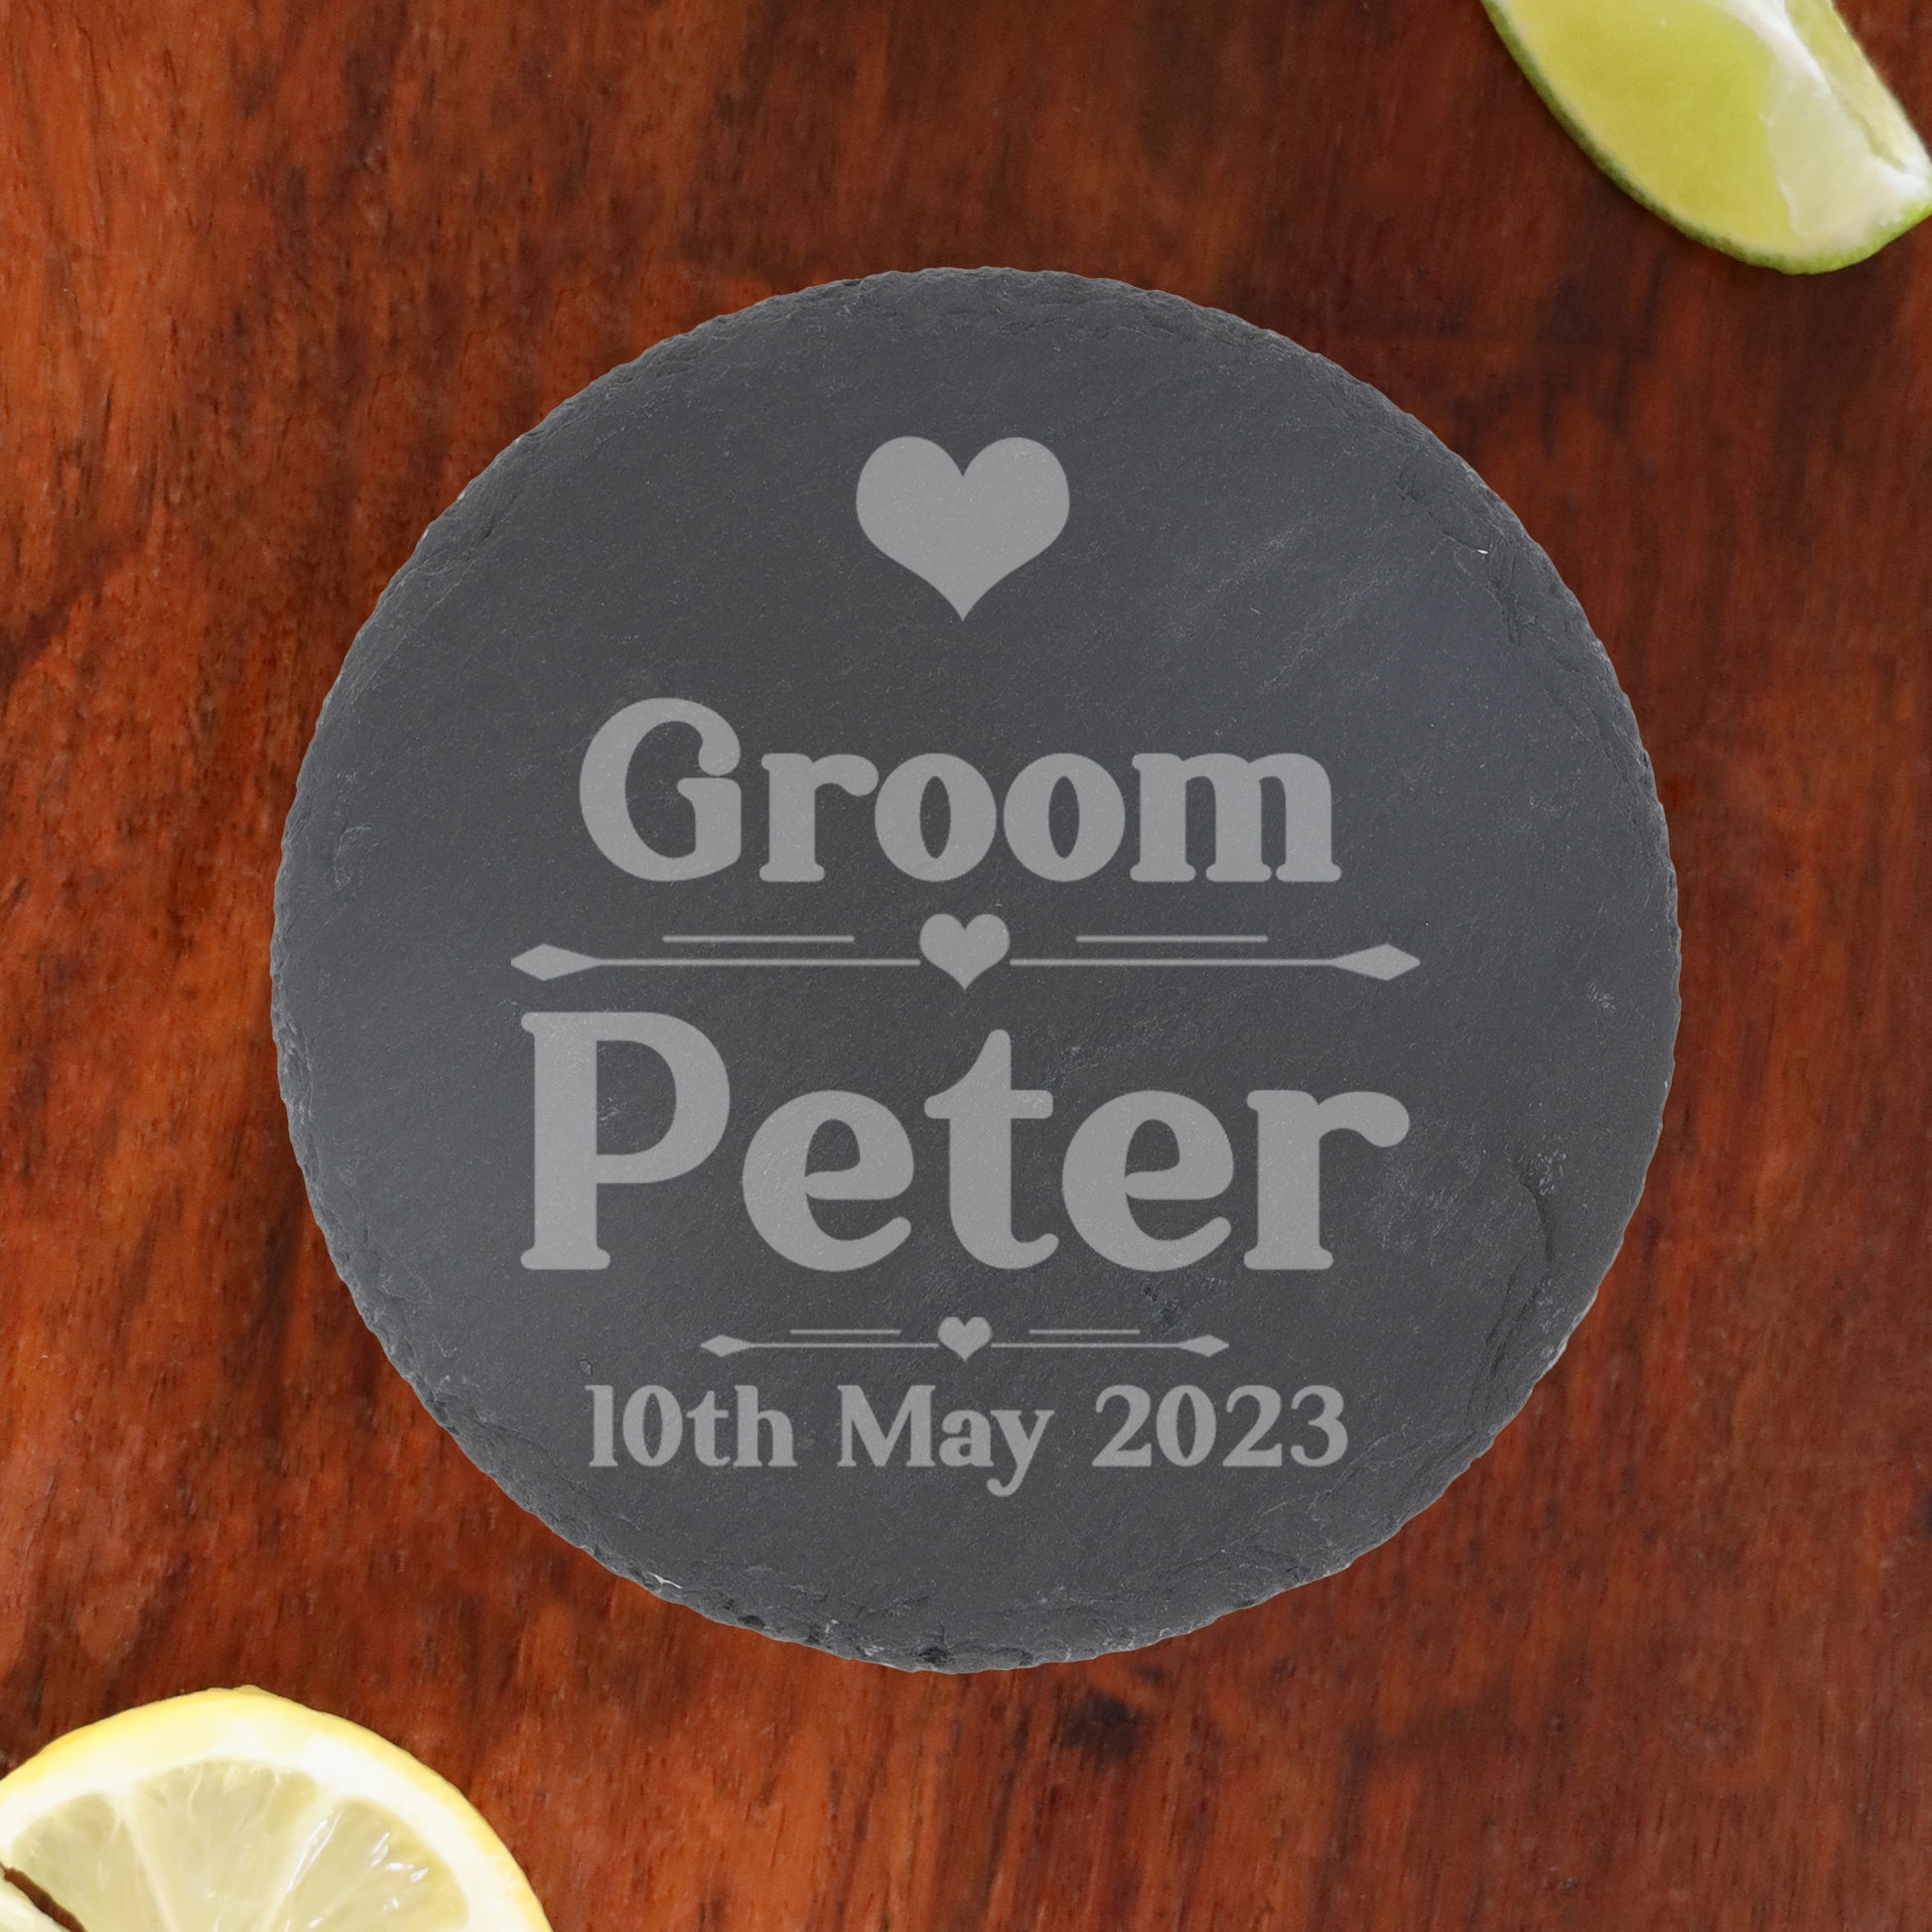 Personalised Bride & Groom Engraved Glass and/or Coaster Wedding Gift Set  - Always Looking Good - 2 x Round Coaster's On Their Own  